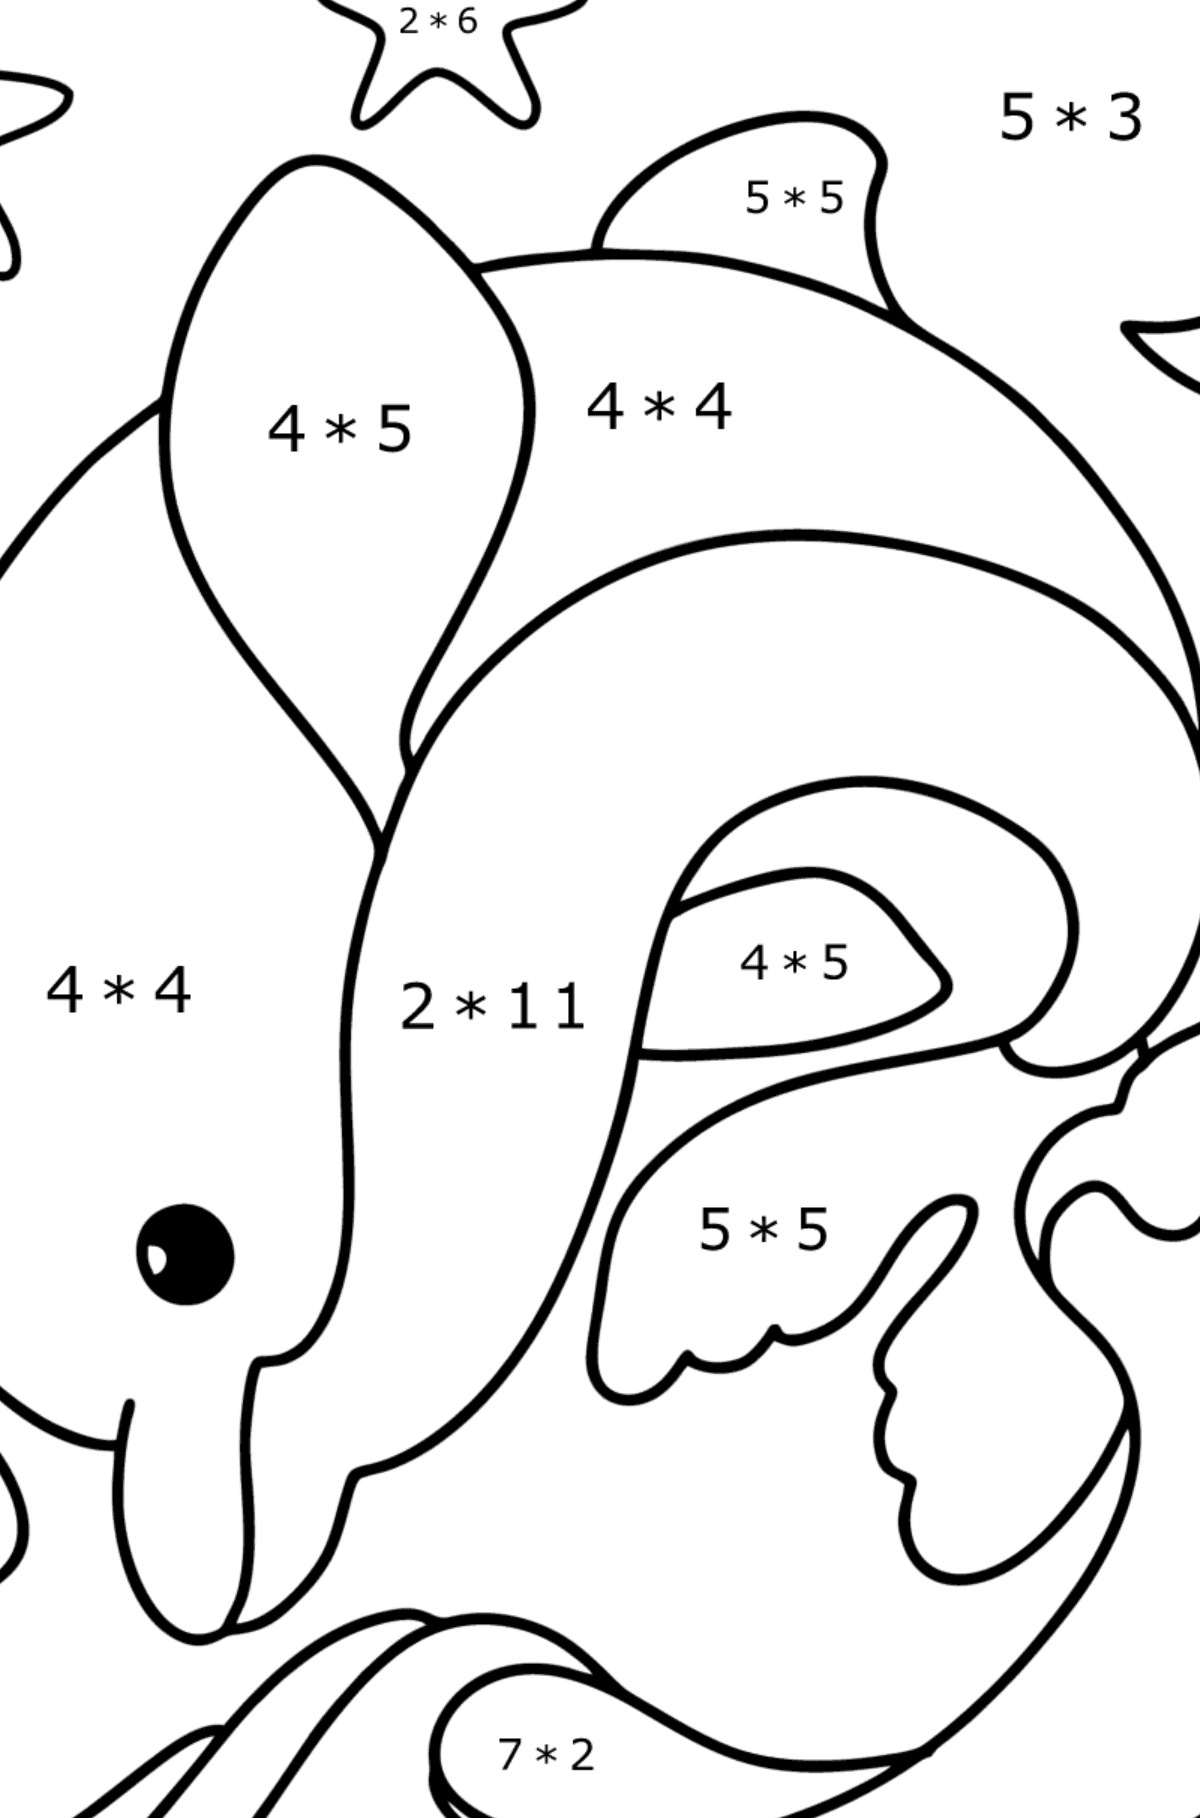 Dolphin in the Sea coloring page - Math Coloring - Multiplication for Kids